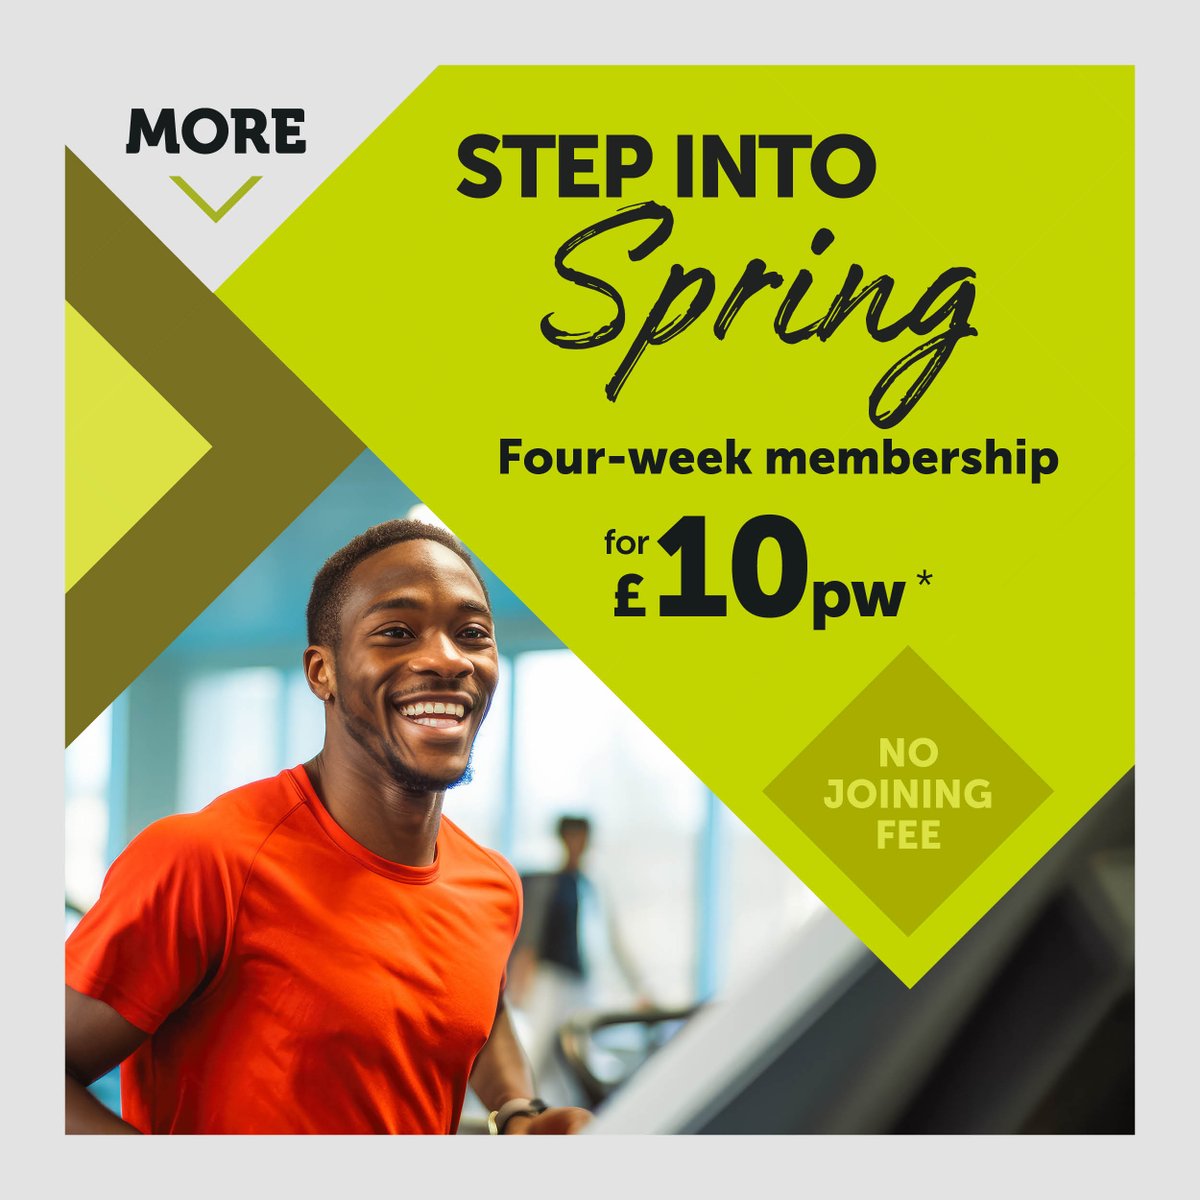 Kickstart a happier, healthier you with a 4-week membership, for only £10 per week!* 💪 Our no-contract, 4-week membership gives you unlimited access to all our fantastic facilities. Join today: shorturl.at/sEHM3 *T&Cs apply.